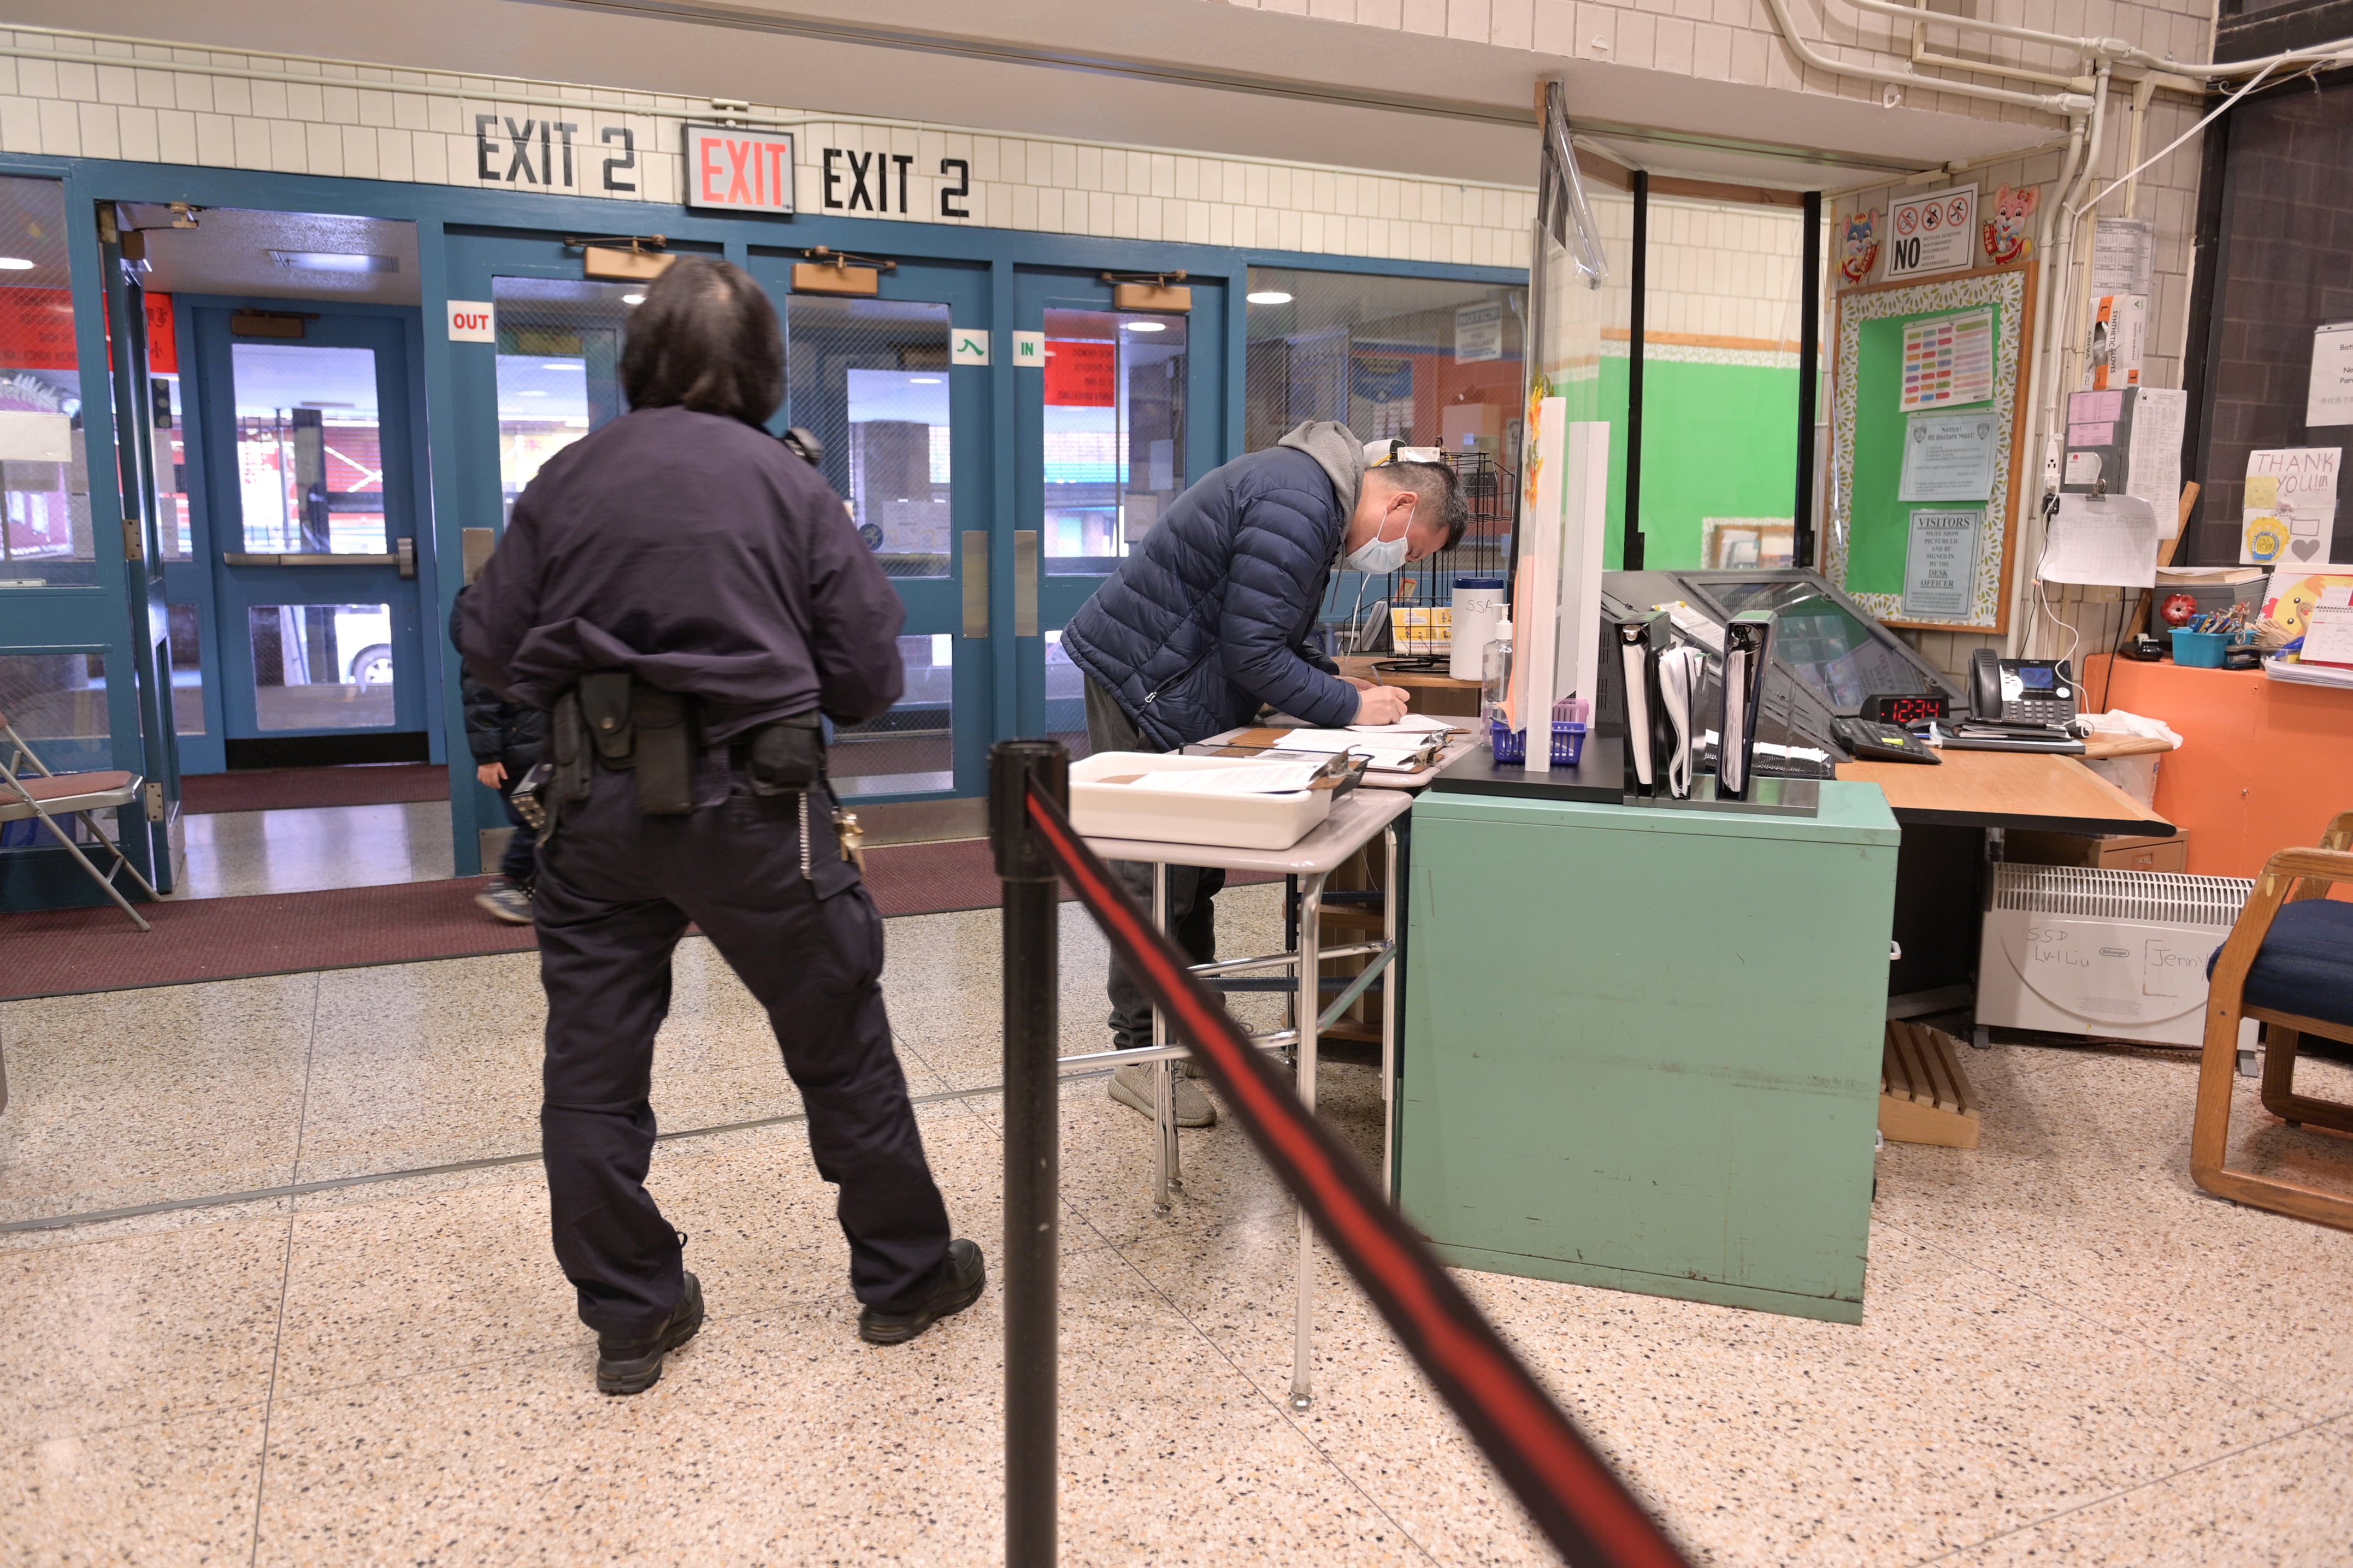 A school security guard watches a parent sign in at the entrance of their school.